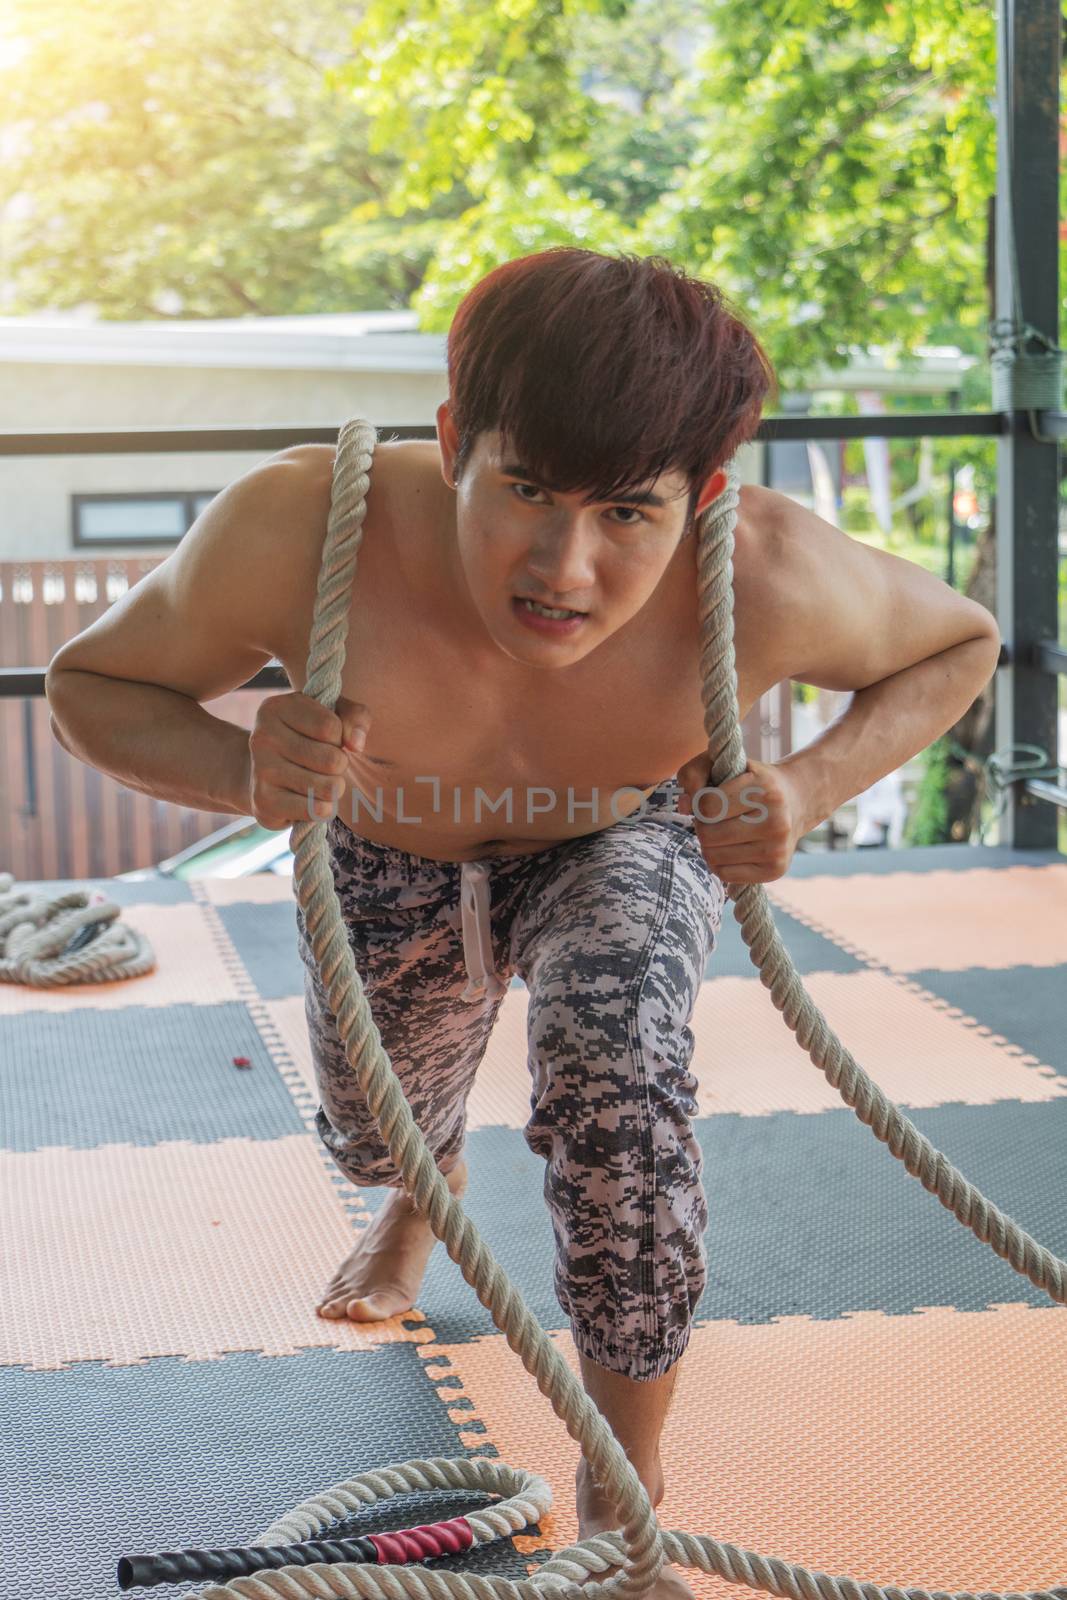 Asian young man is exercising by pulling a rope.